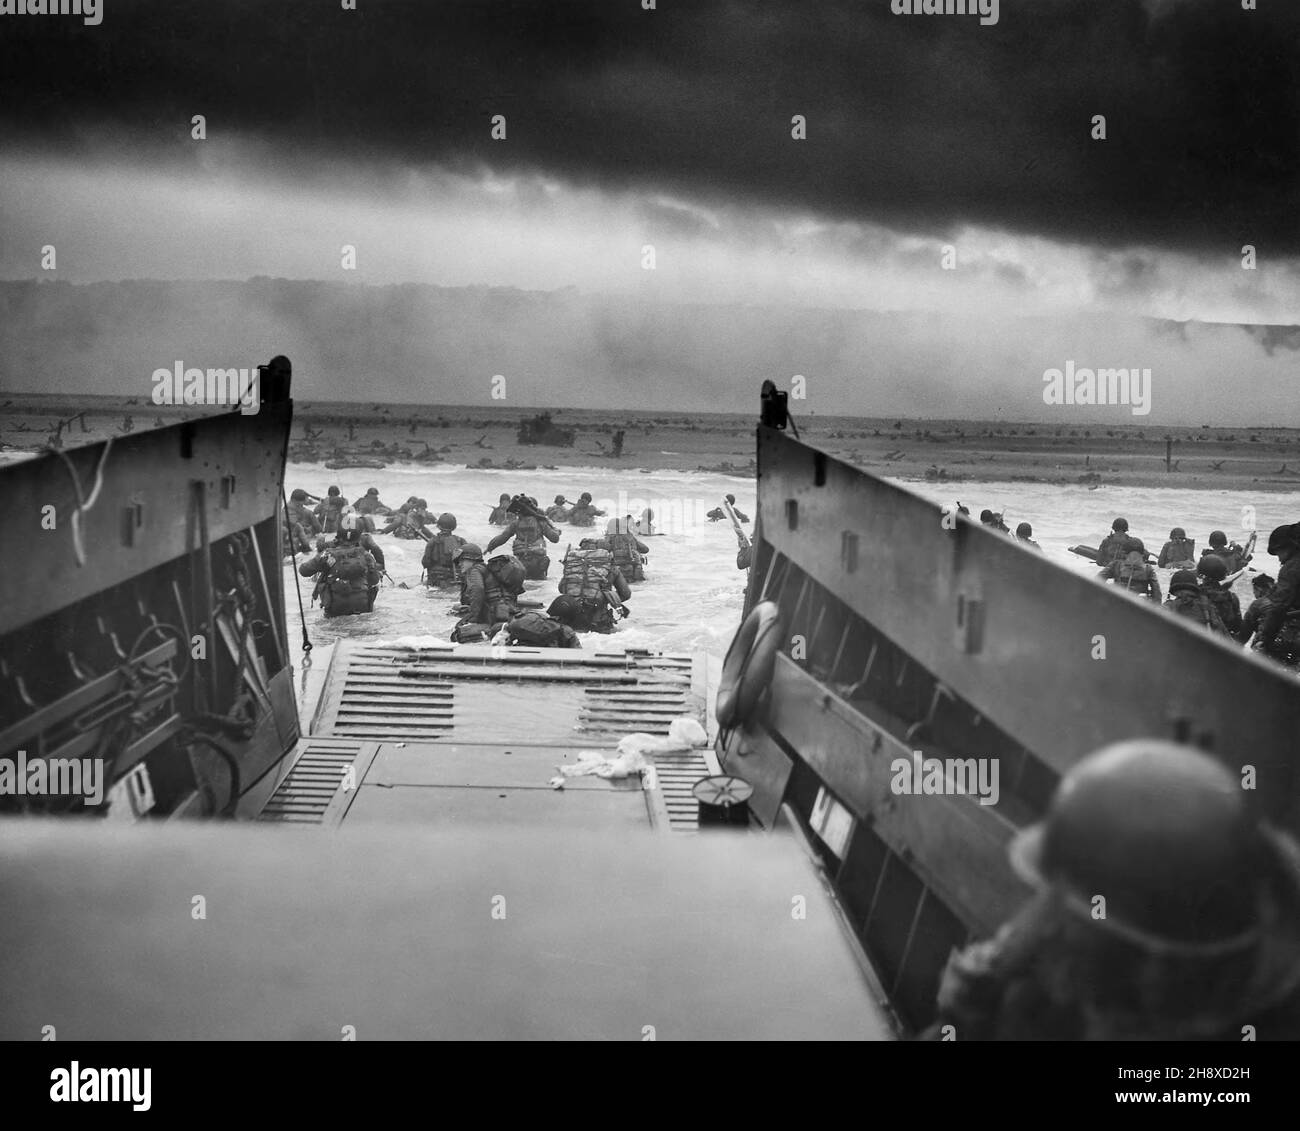 American Soldiers wading into Water after landing in Normandy, France, Franklin D. Roosevelt Library, U.S. National Archives and Records Administration, June 6, 1944 Stock Photo